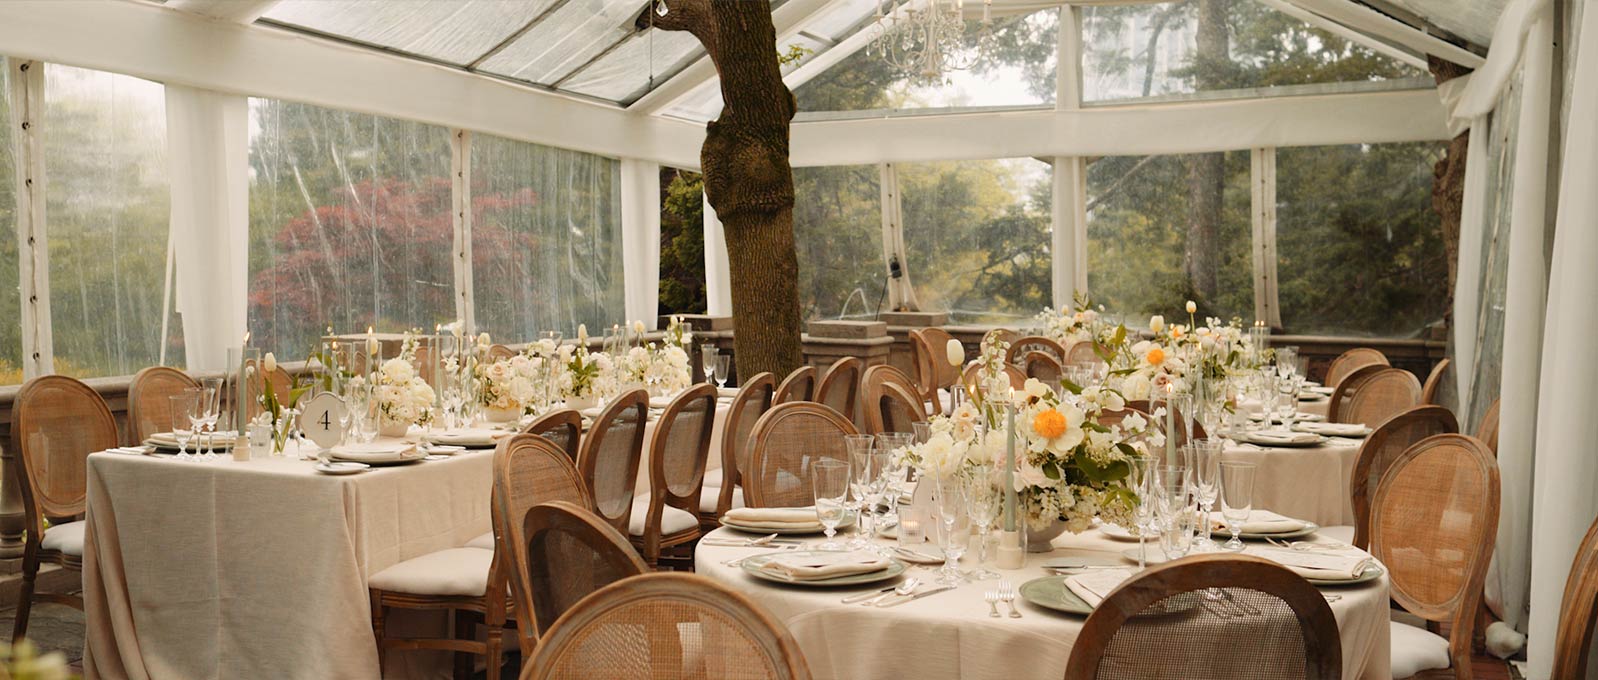 Graydon Hall Manor Outdoor Wedding Reception Details. Wedding Videography by Outside In Studio